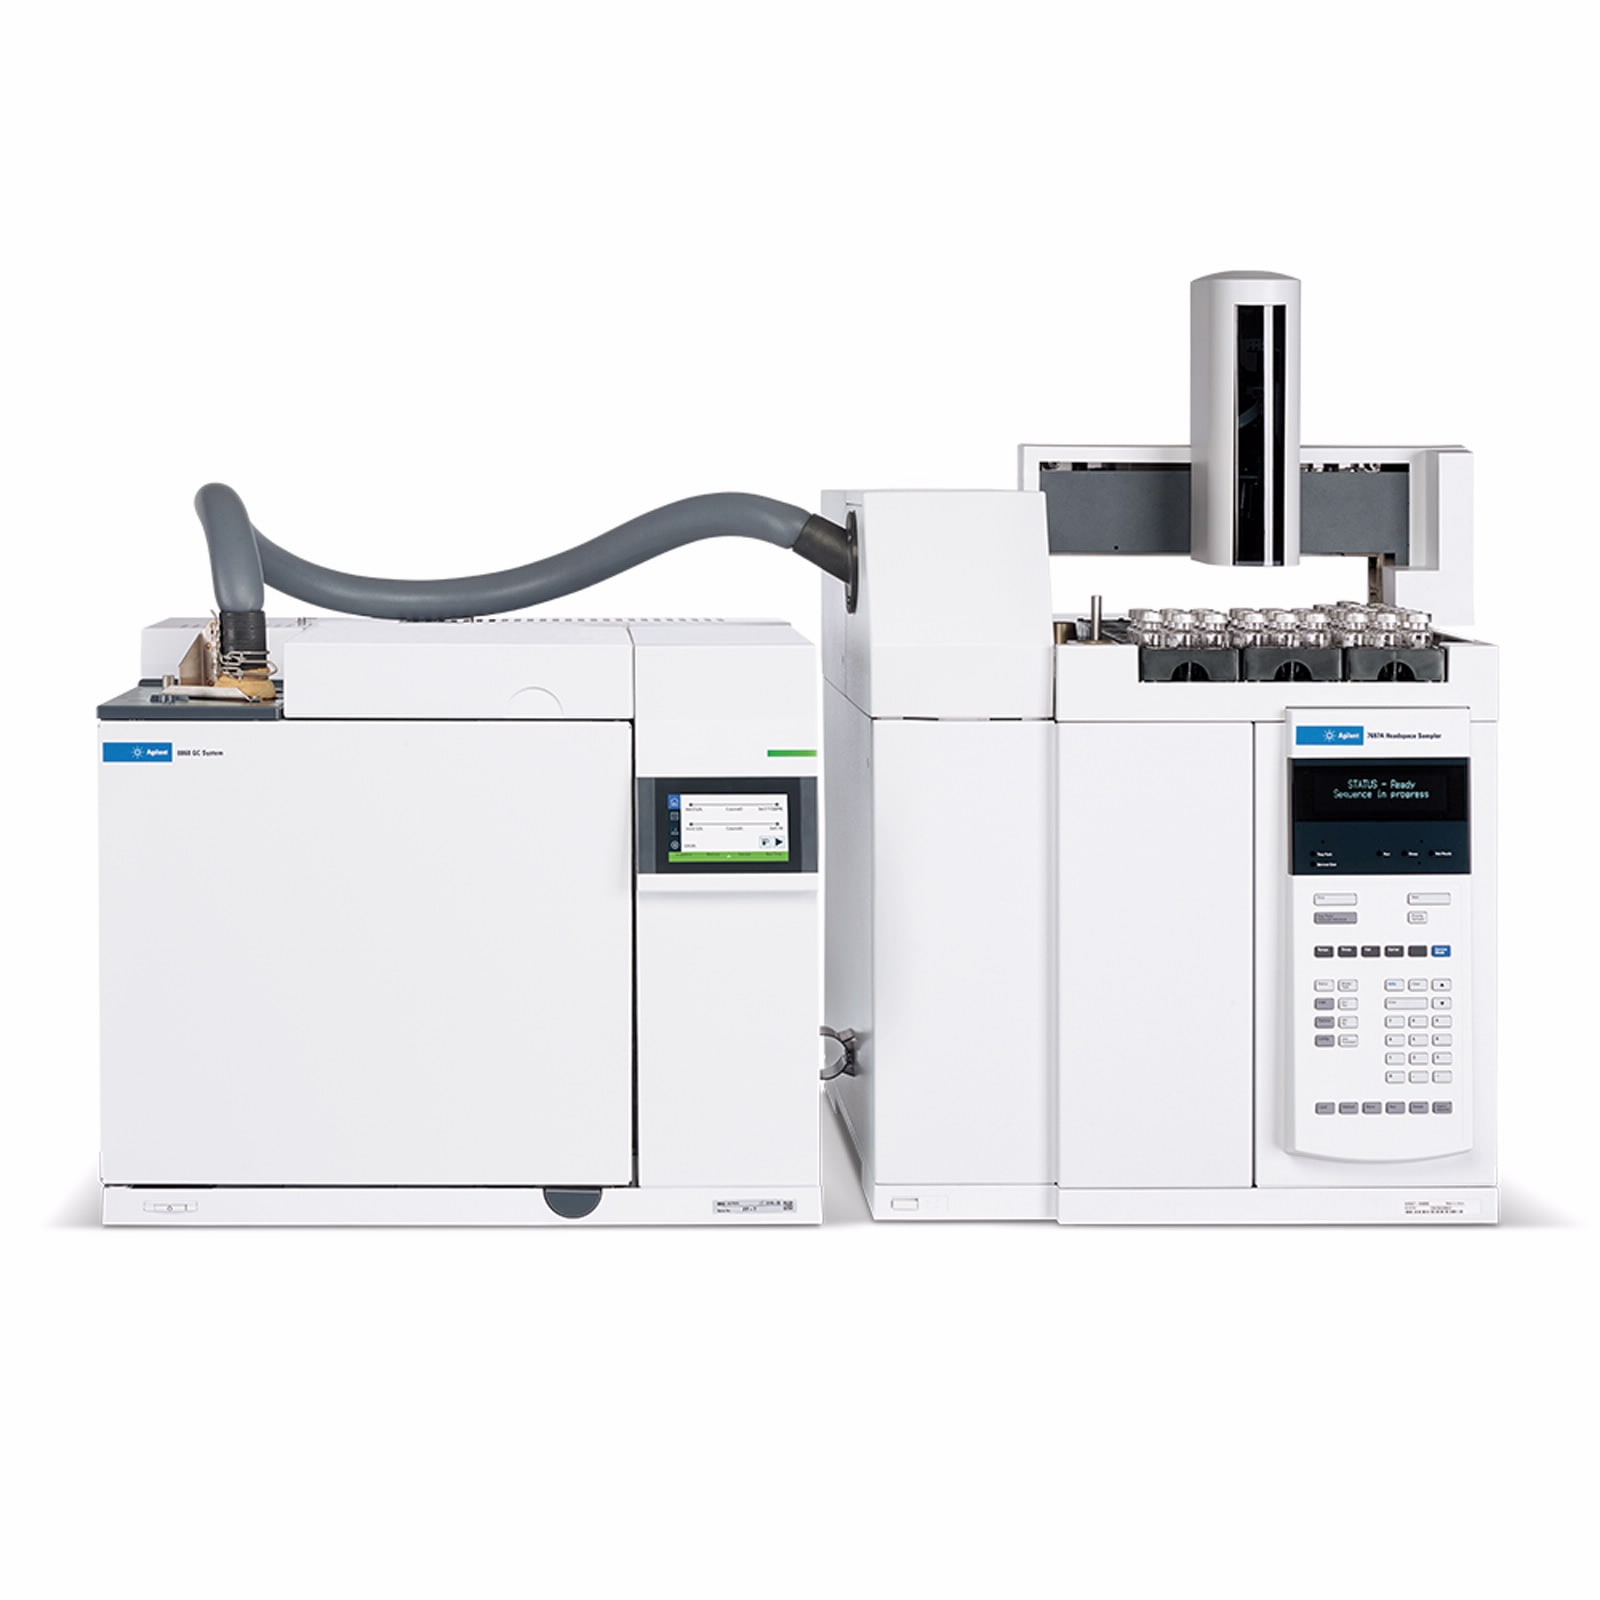 Agilent 6890 troubleshooting guide